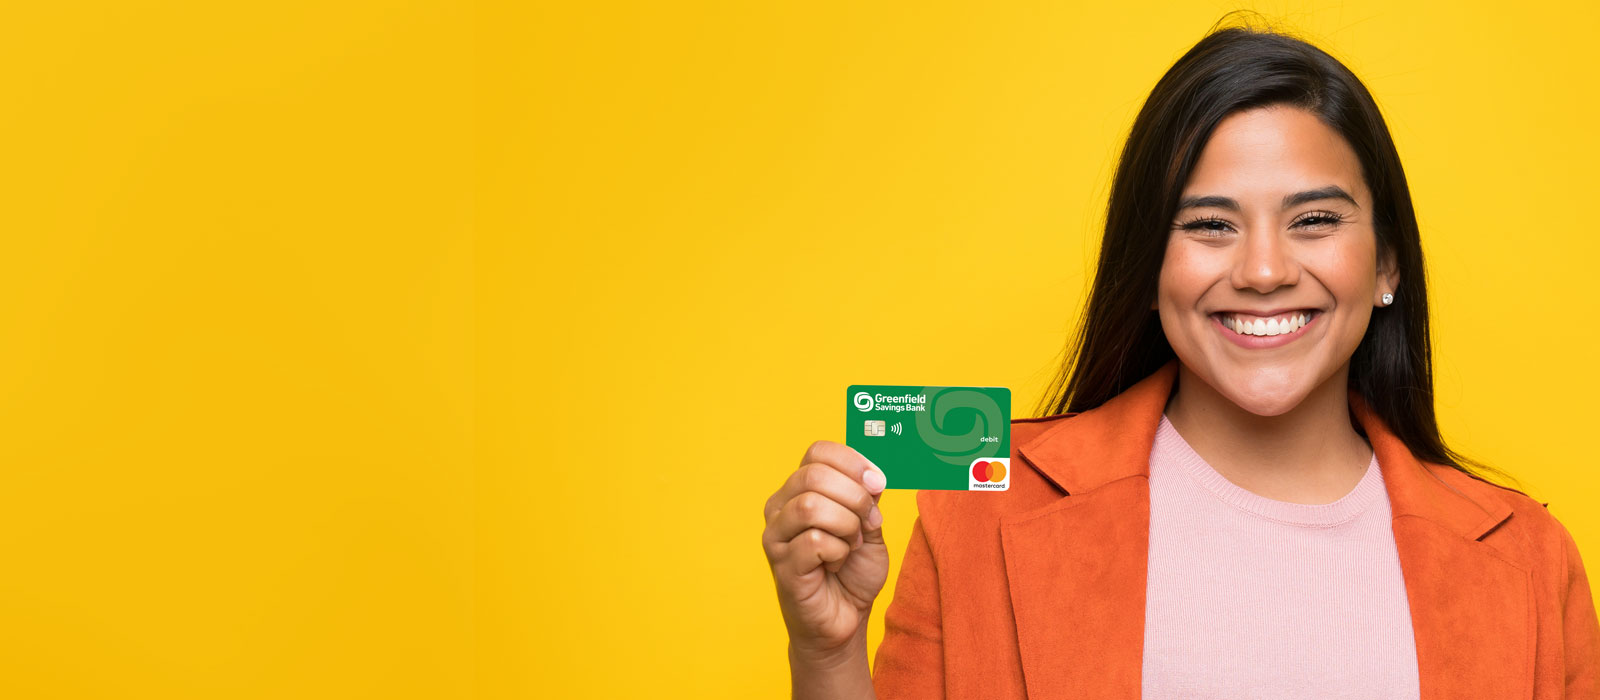 A smiling woman hold a GSB debit card